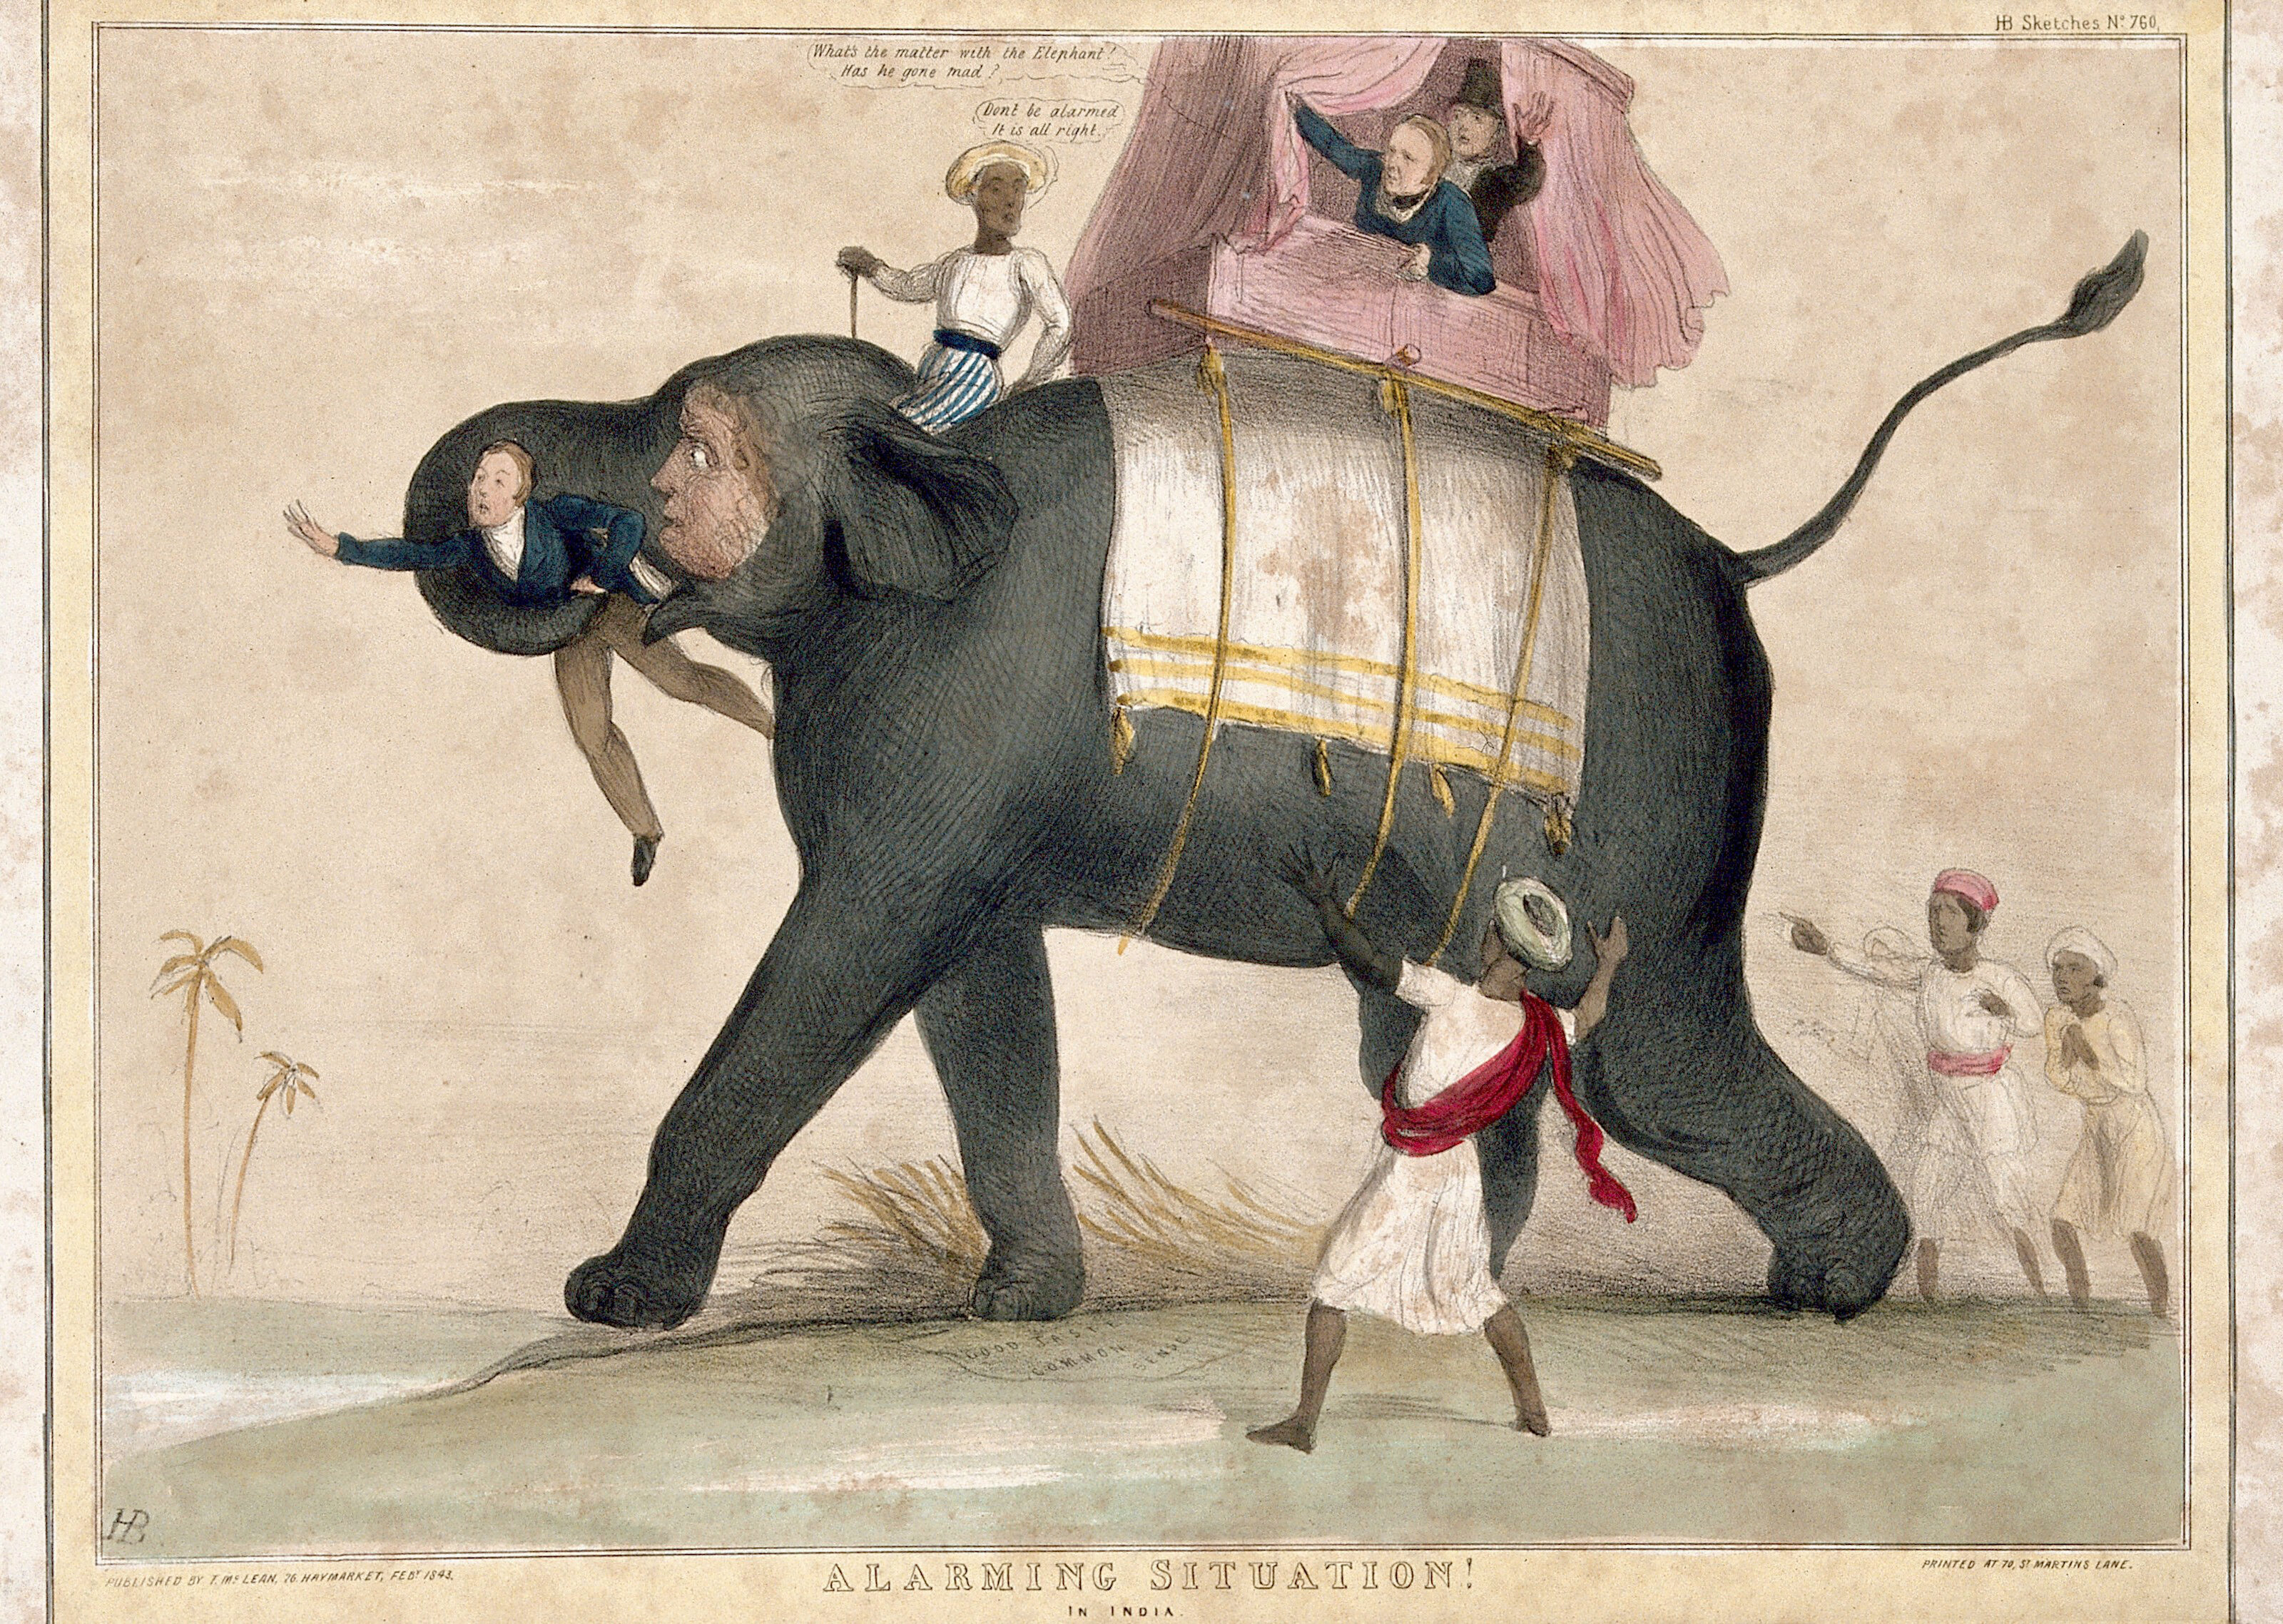 Aphasia and drawing elephants | Wellcome Collection